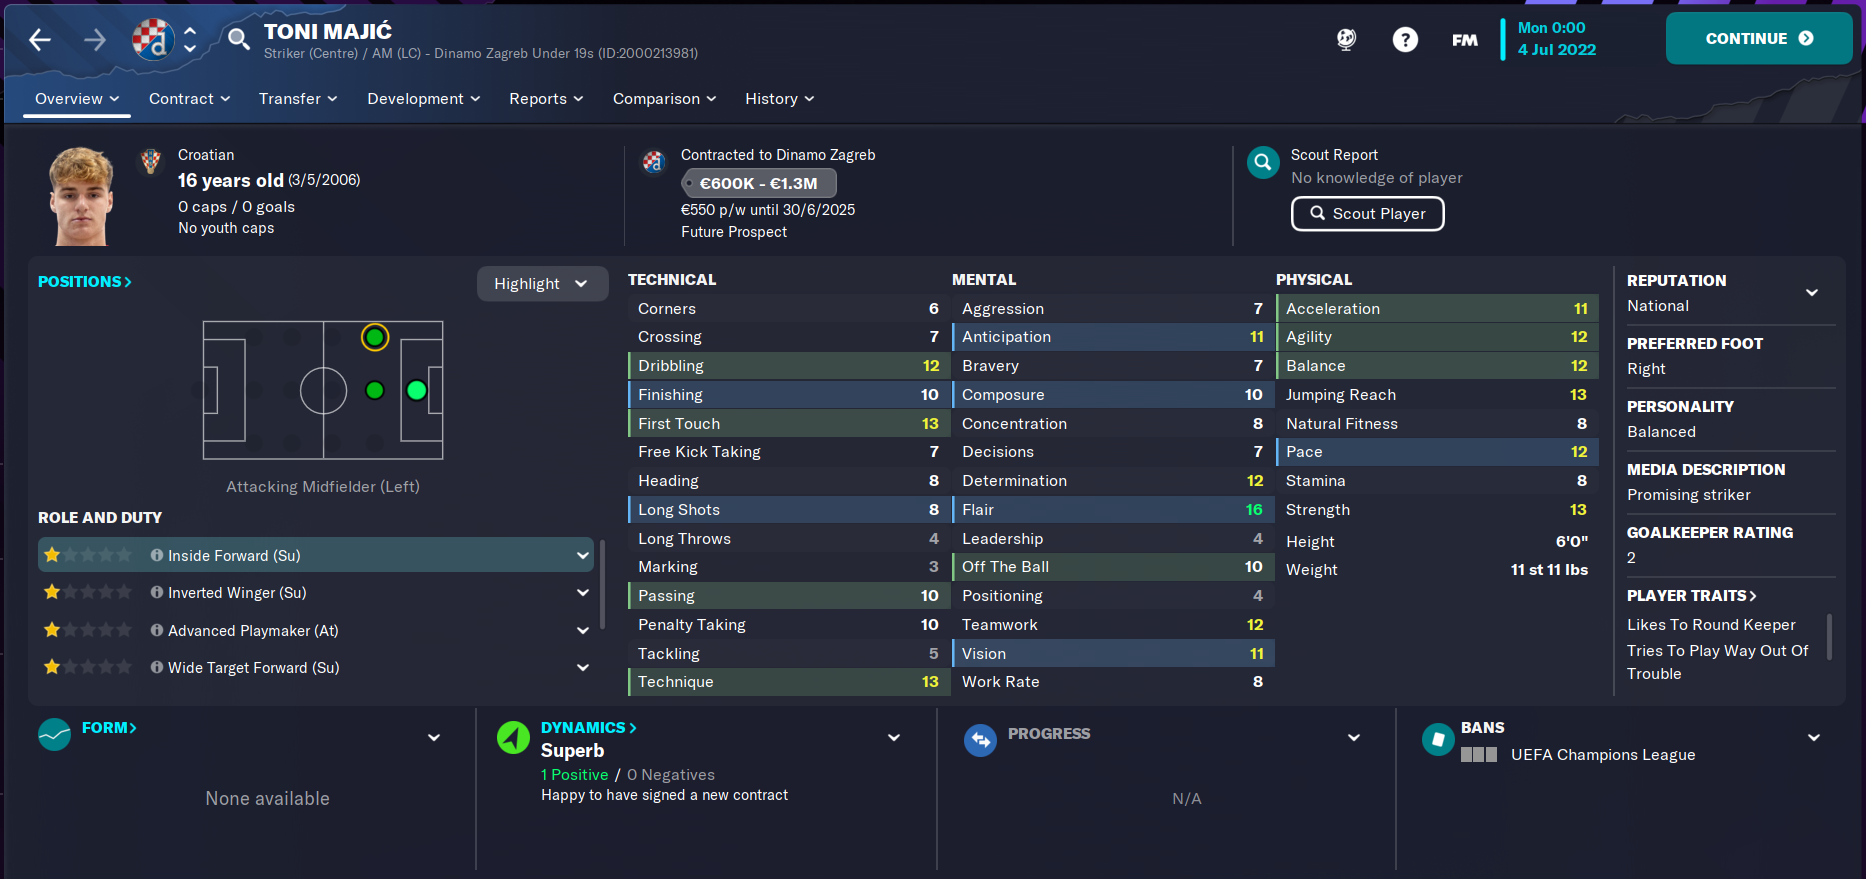 Your New Save: Day One on Football Manager 2022 - Dictate The Game